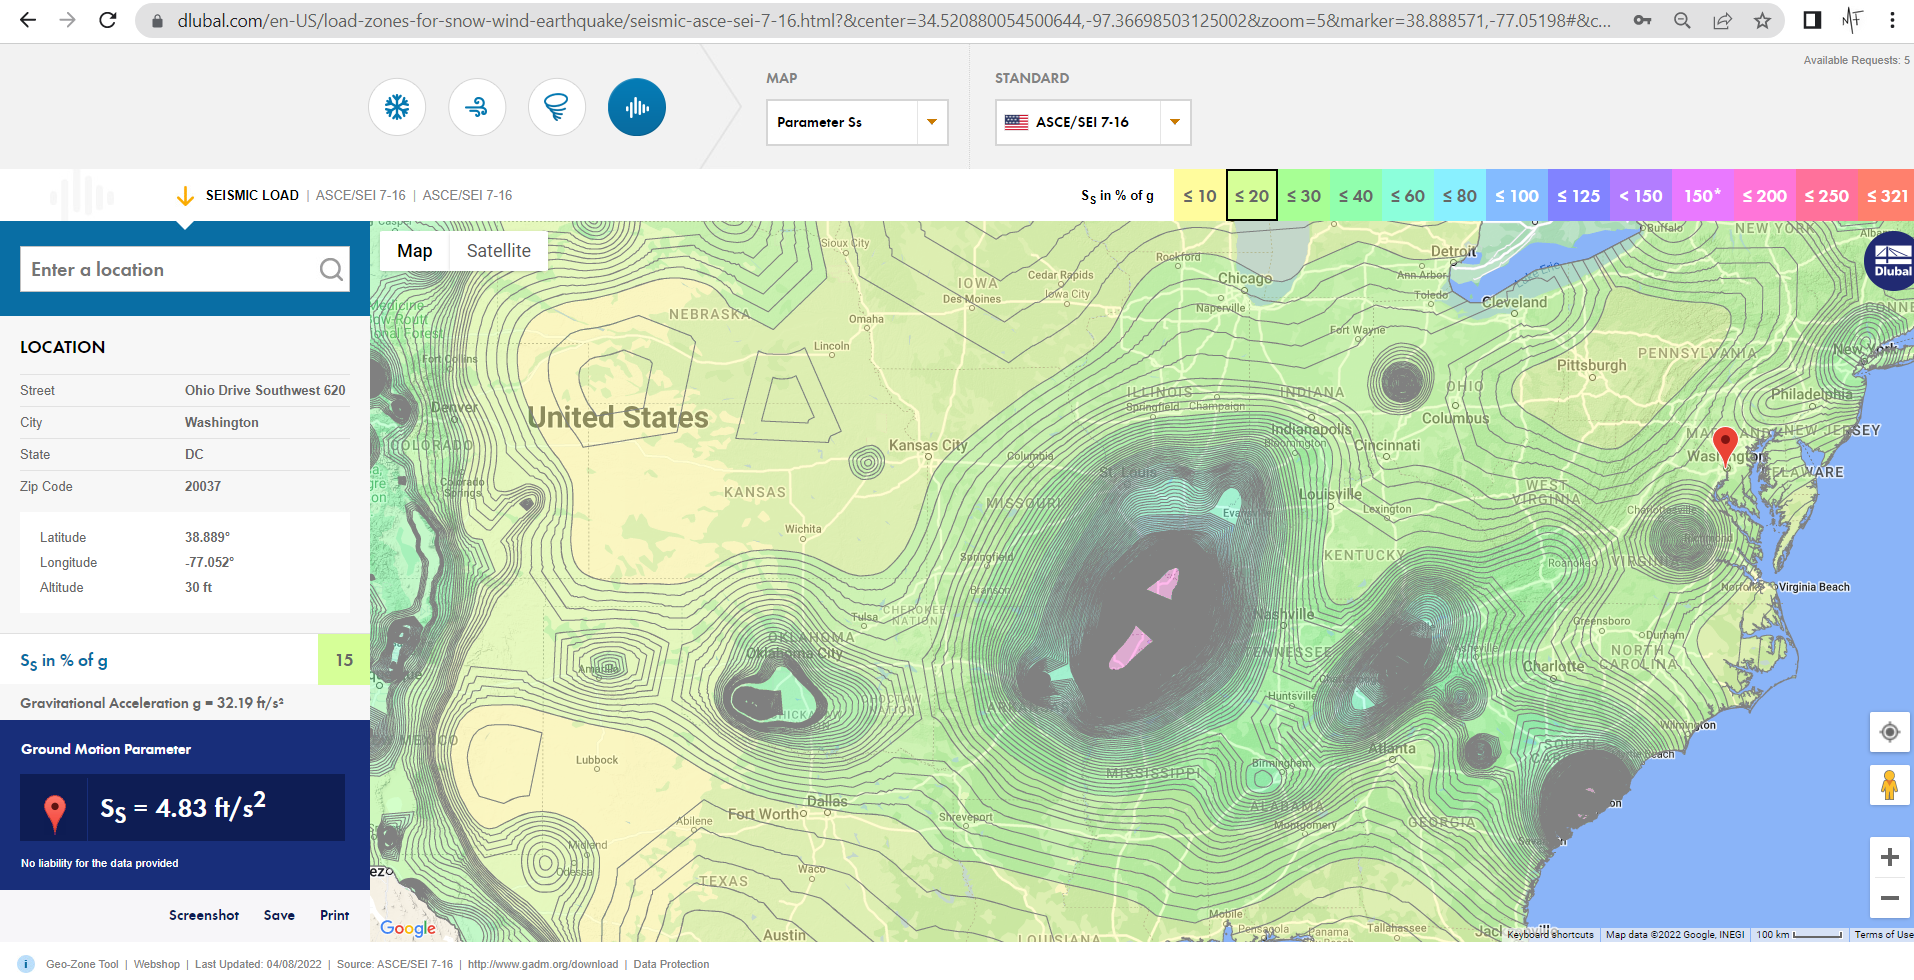 Online Service "Geo-Zone Tool: Snow Load, Wind Speed, and Seismic Load Maps"